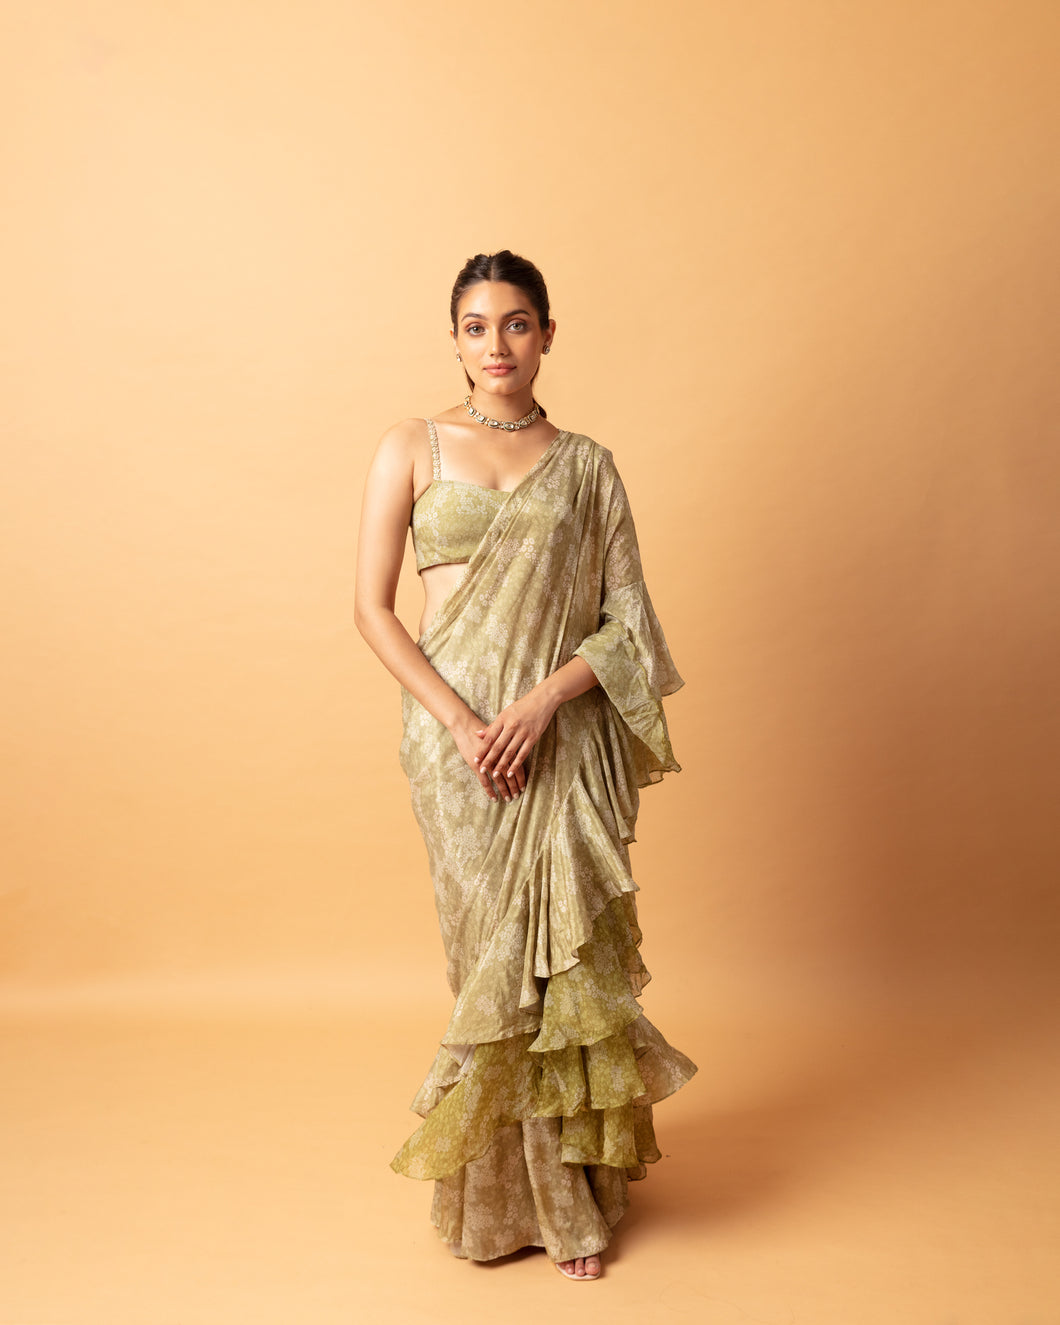 Green (pre stitched) Printed Frill Sari + Printed Blouse